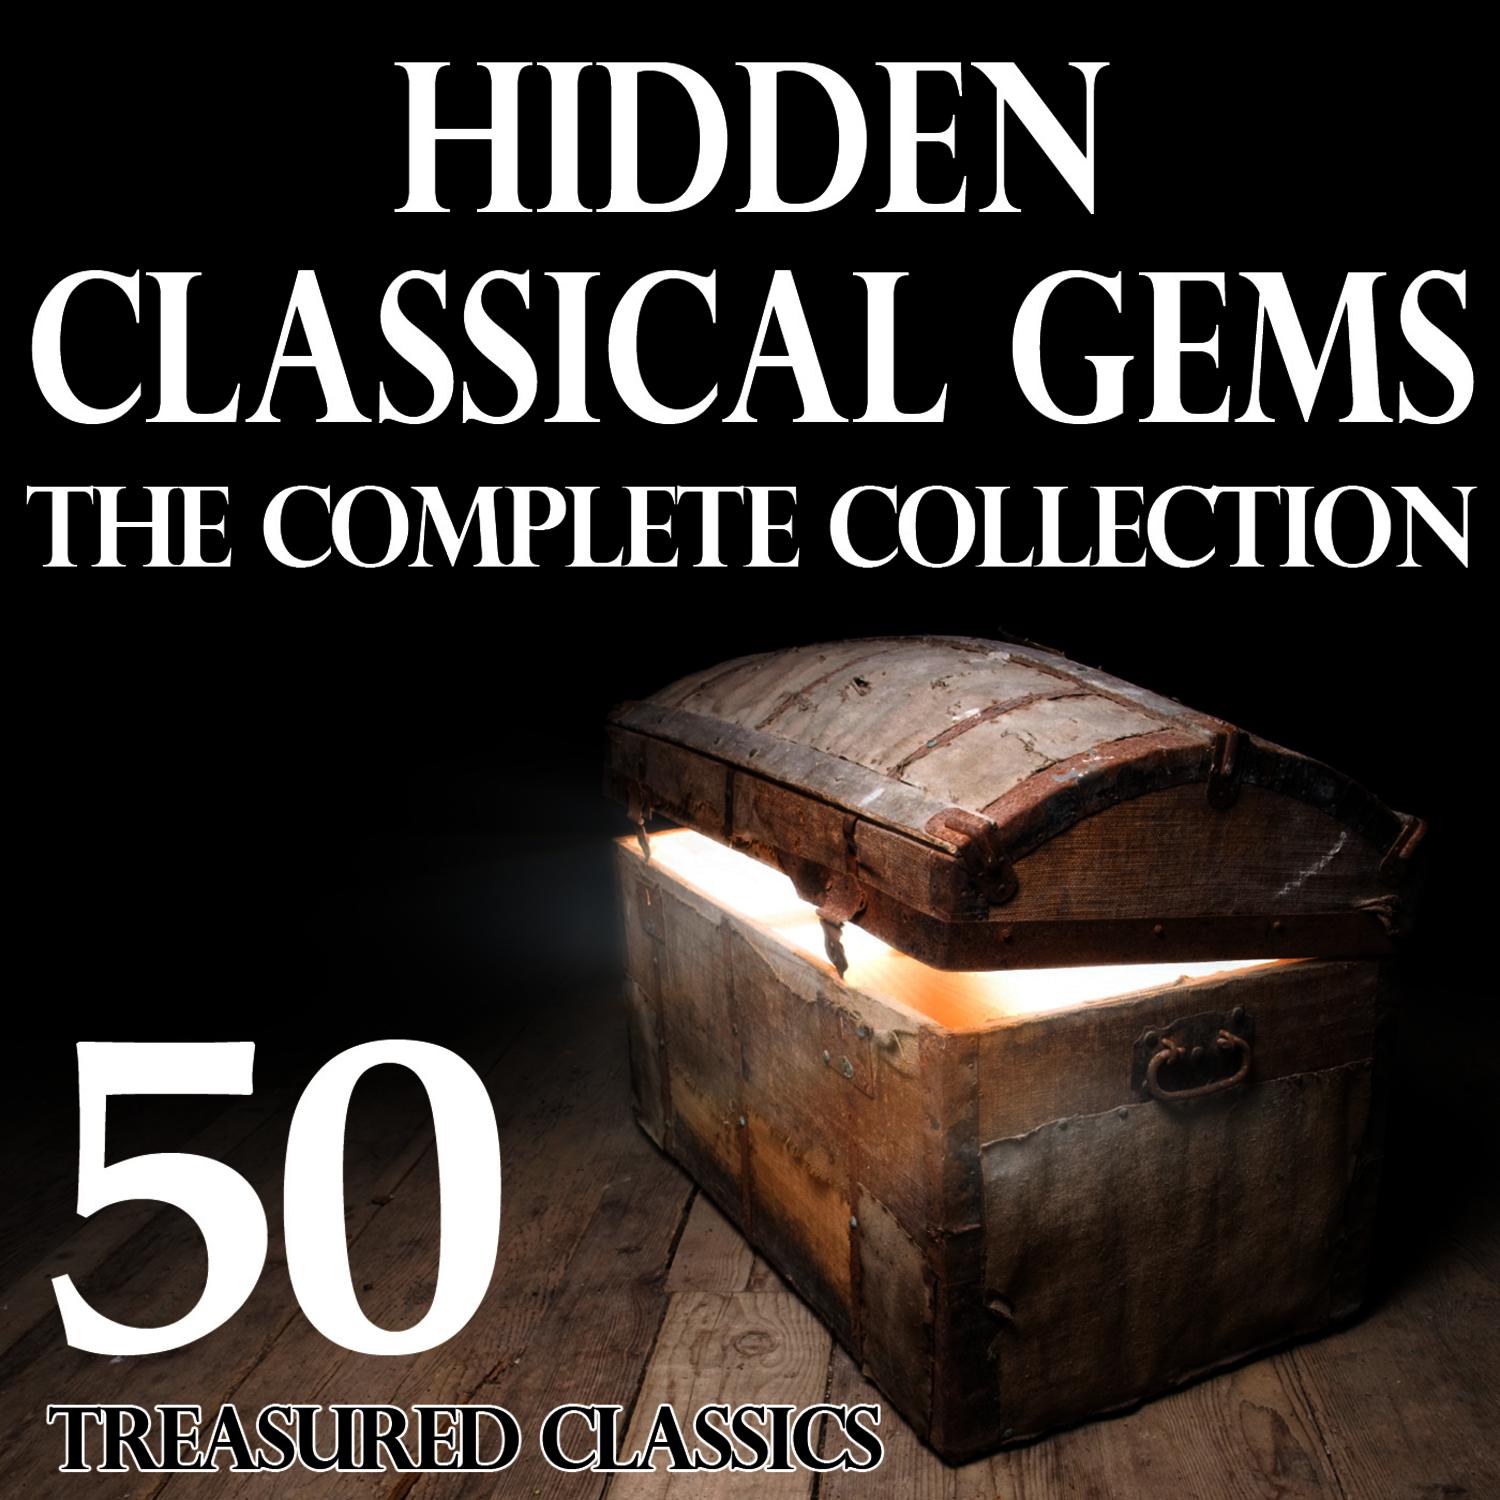 Hidden Classical Gems - The Complete Collection 50 Treasured Classics